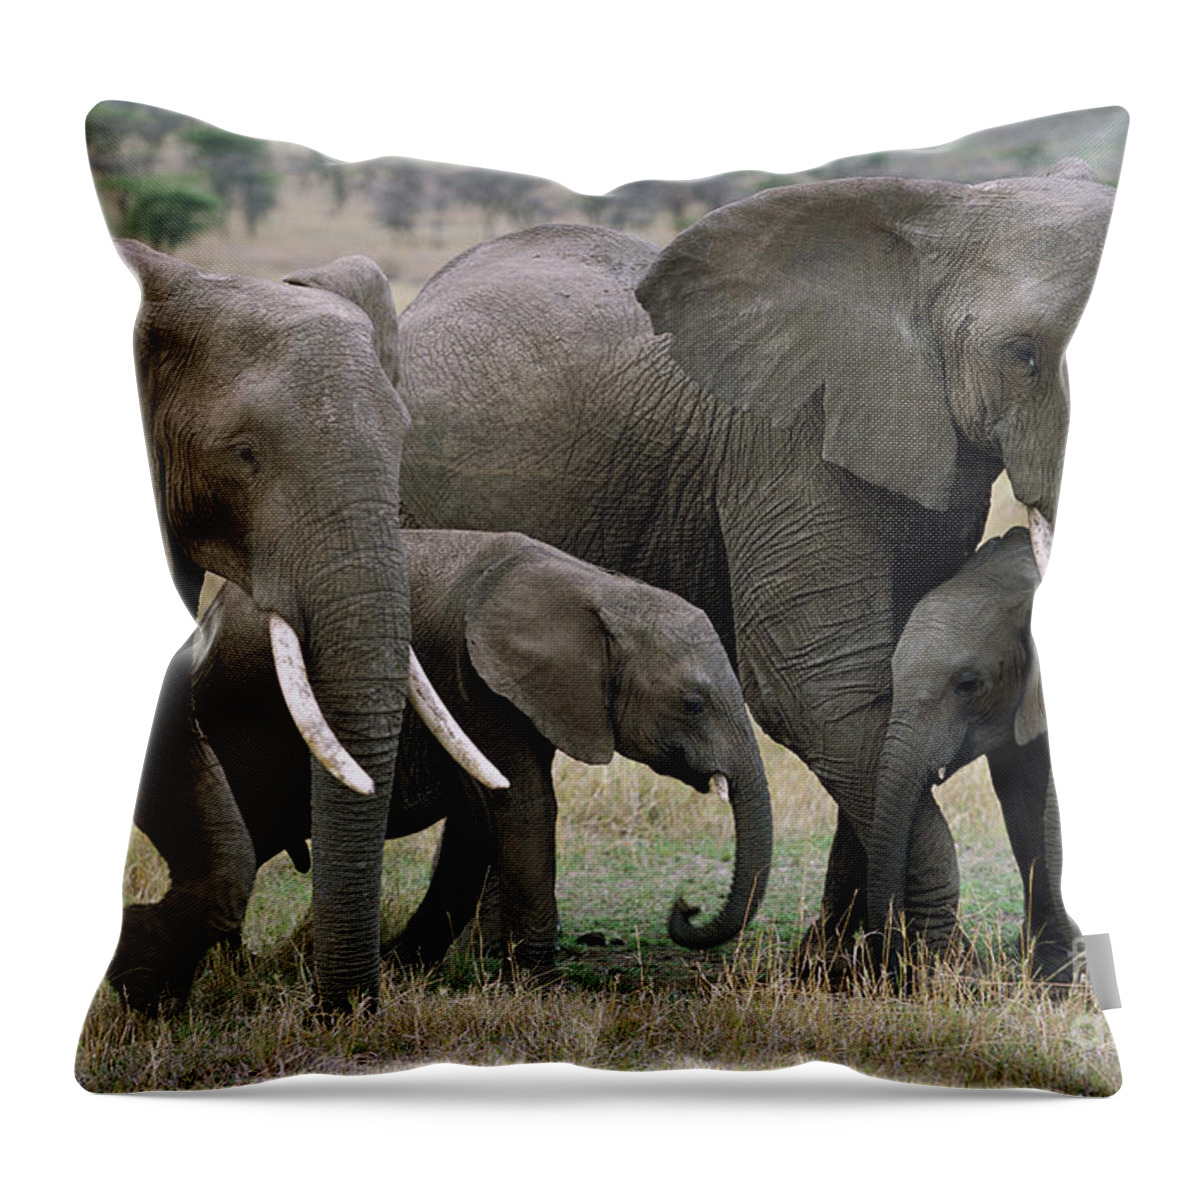 00344769 Throw Pillow featuring the photograph African Elephant Females And Calves by Yva Momatiuk and John Eastcott